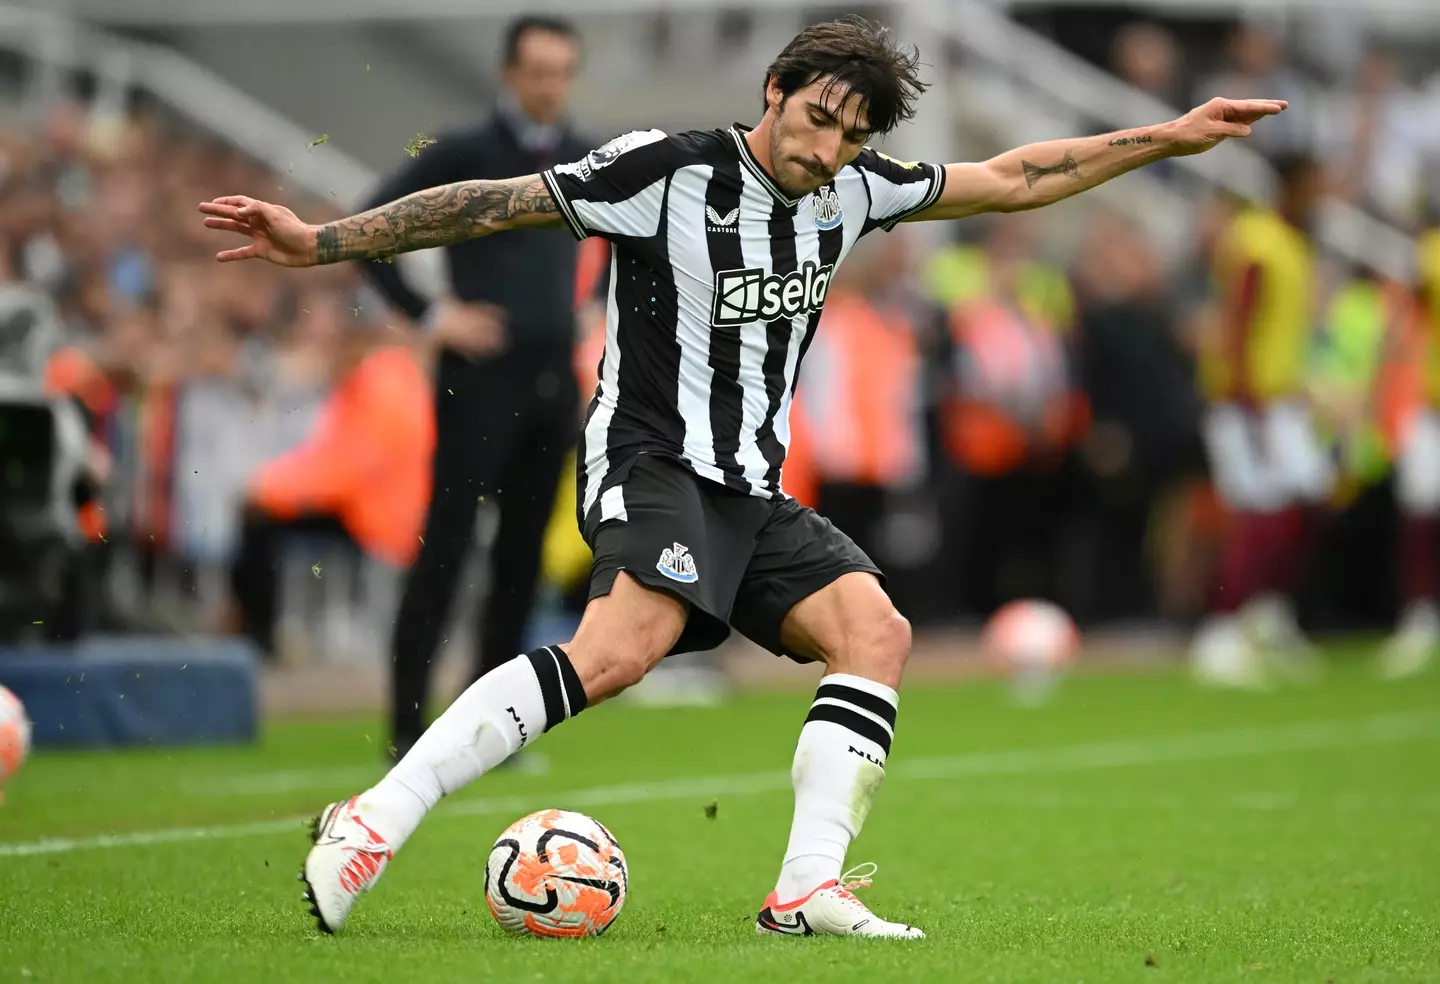 Sandro Tonali in action for Newcastle United. Image: Getty